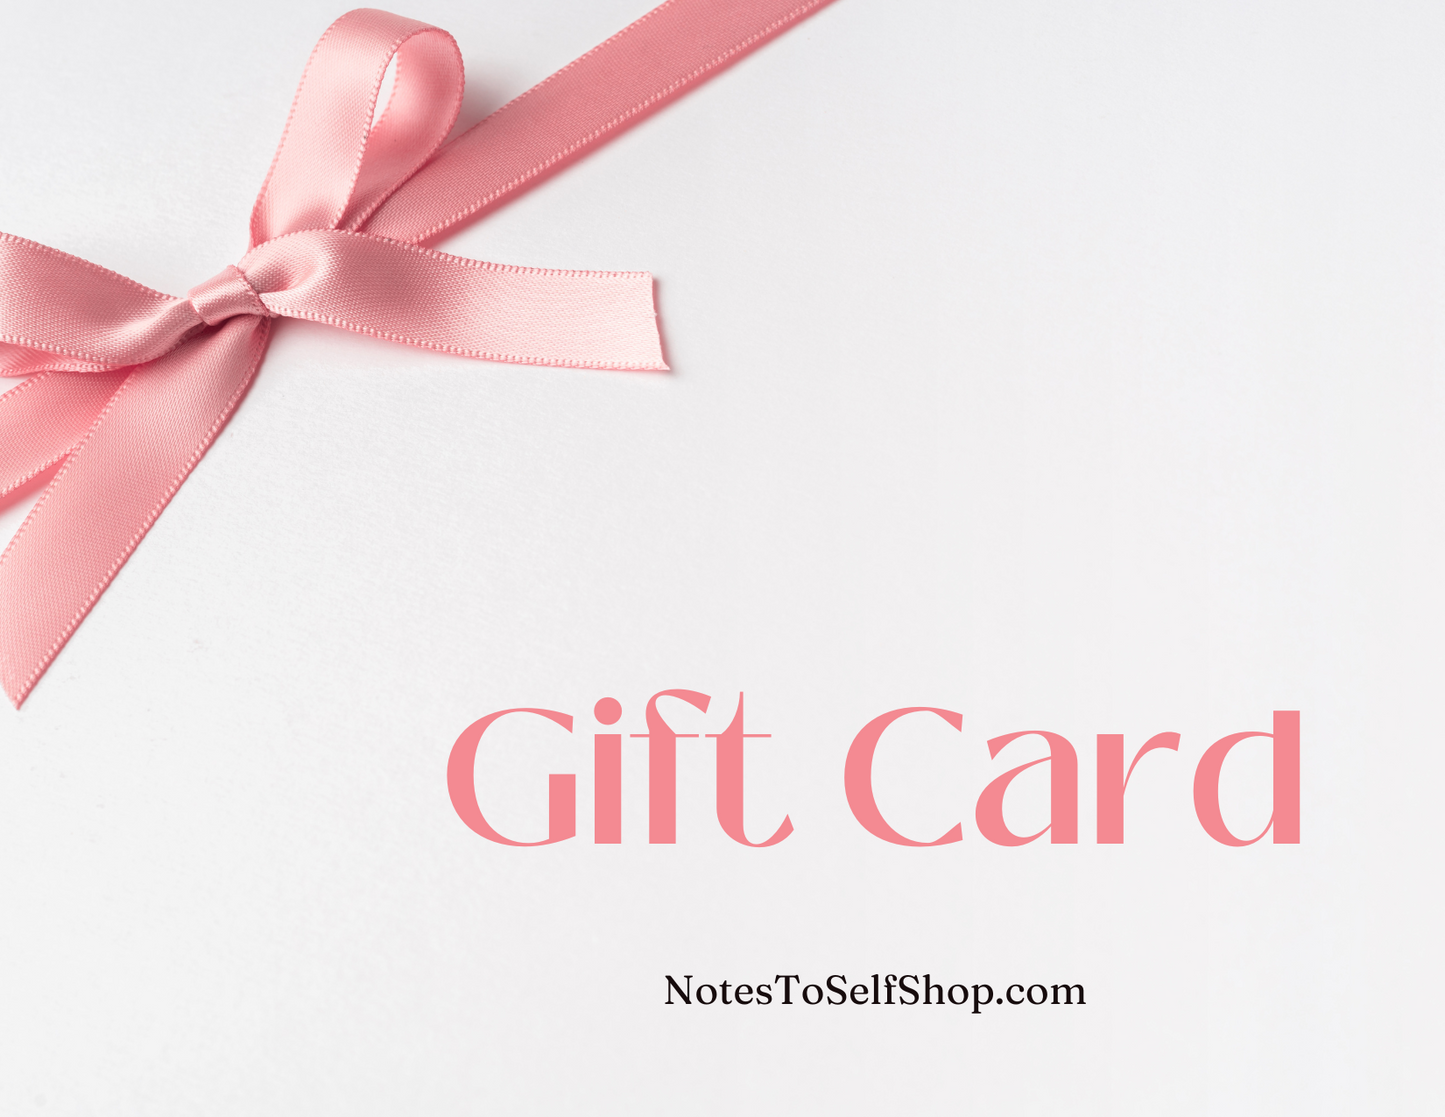 Notes To Self Shop Gift Card